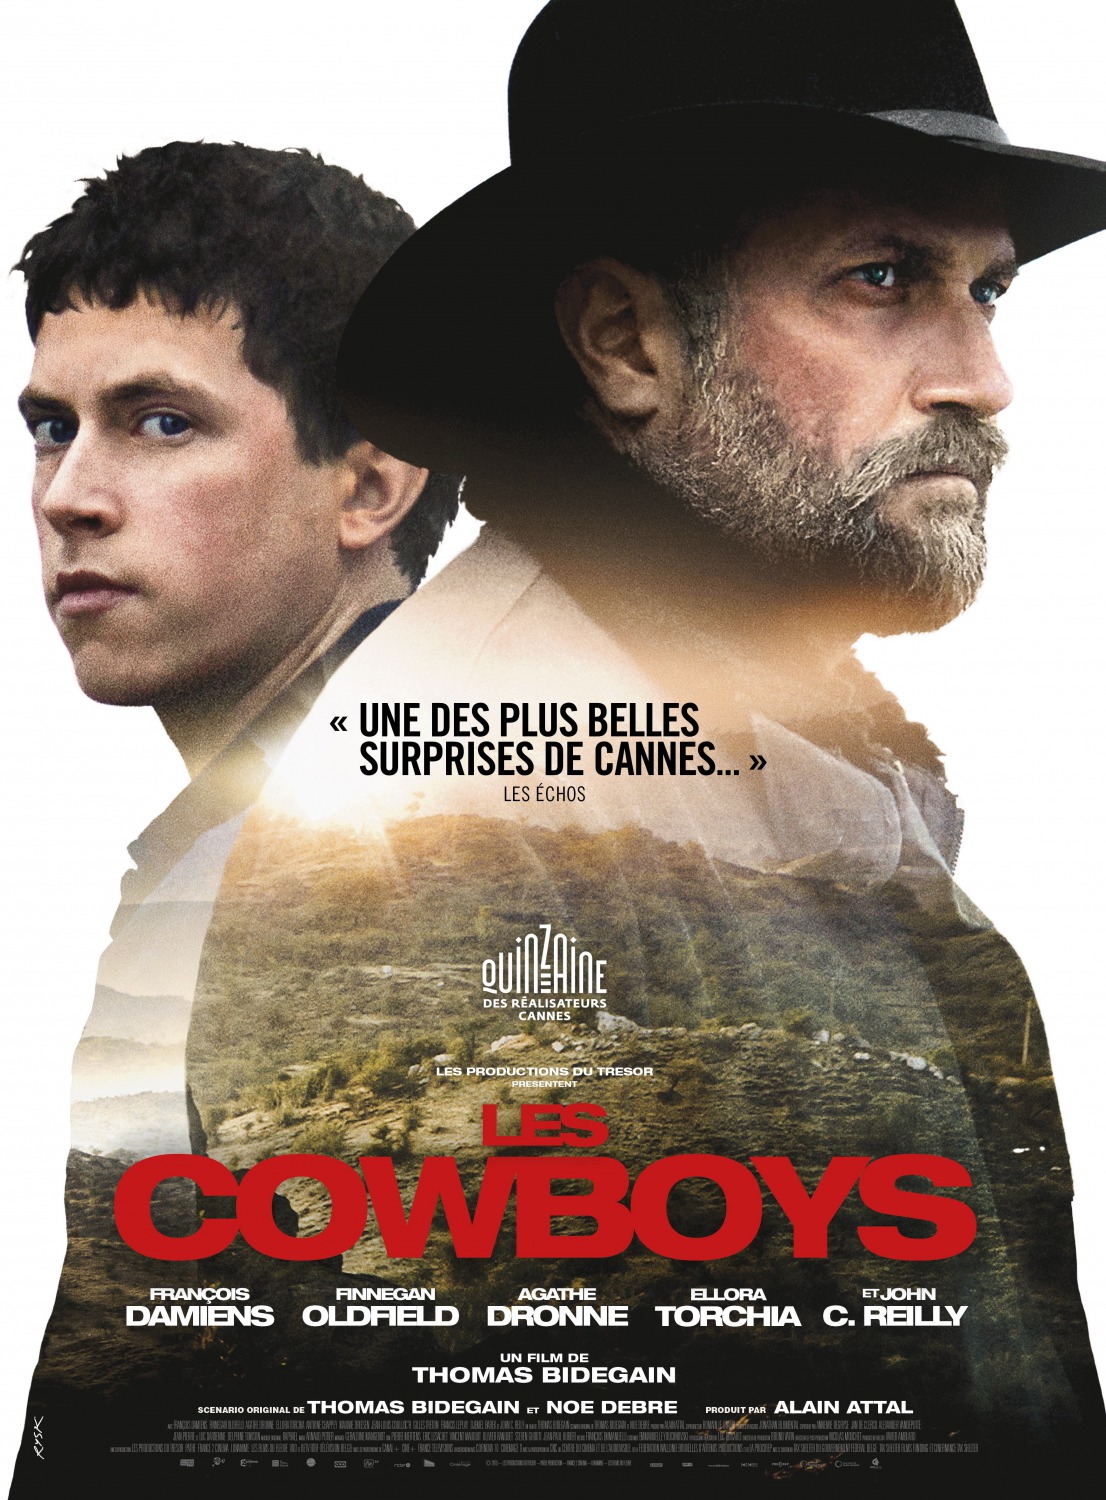 Extra Large Movie Poster Image for Les cowboys (#1 of 2)